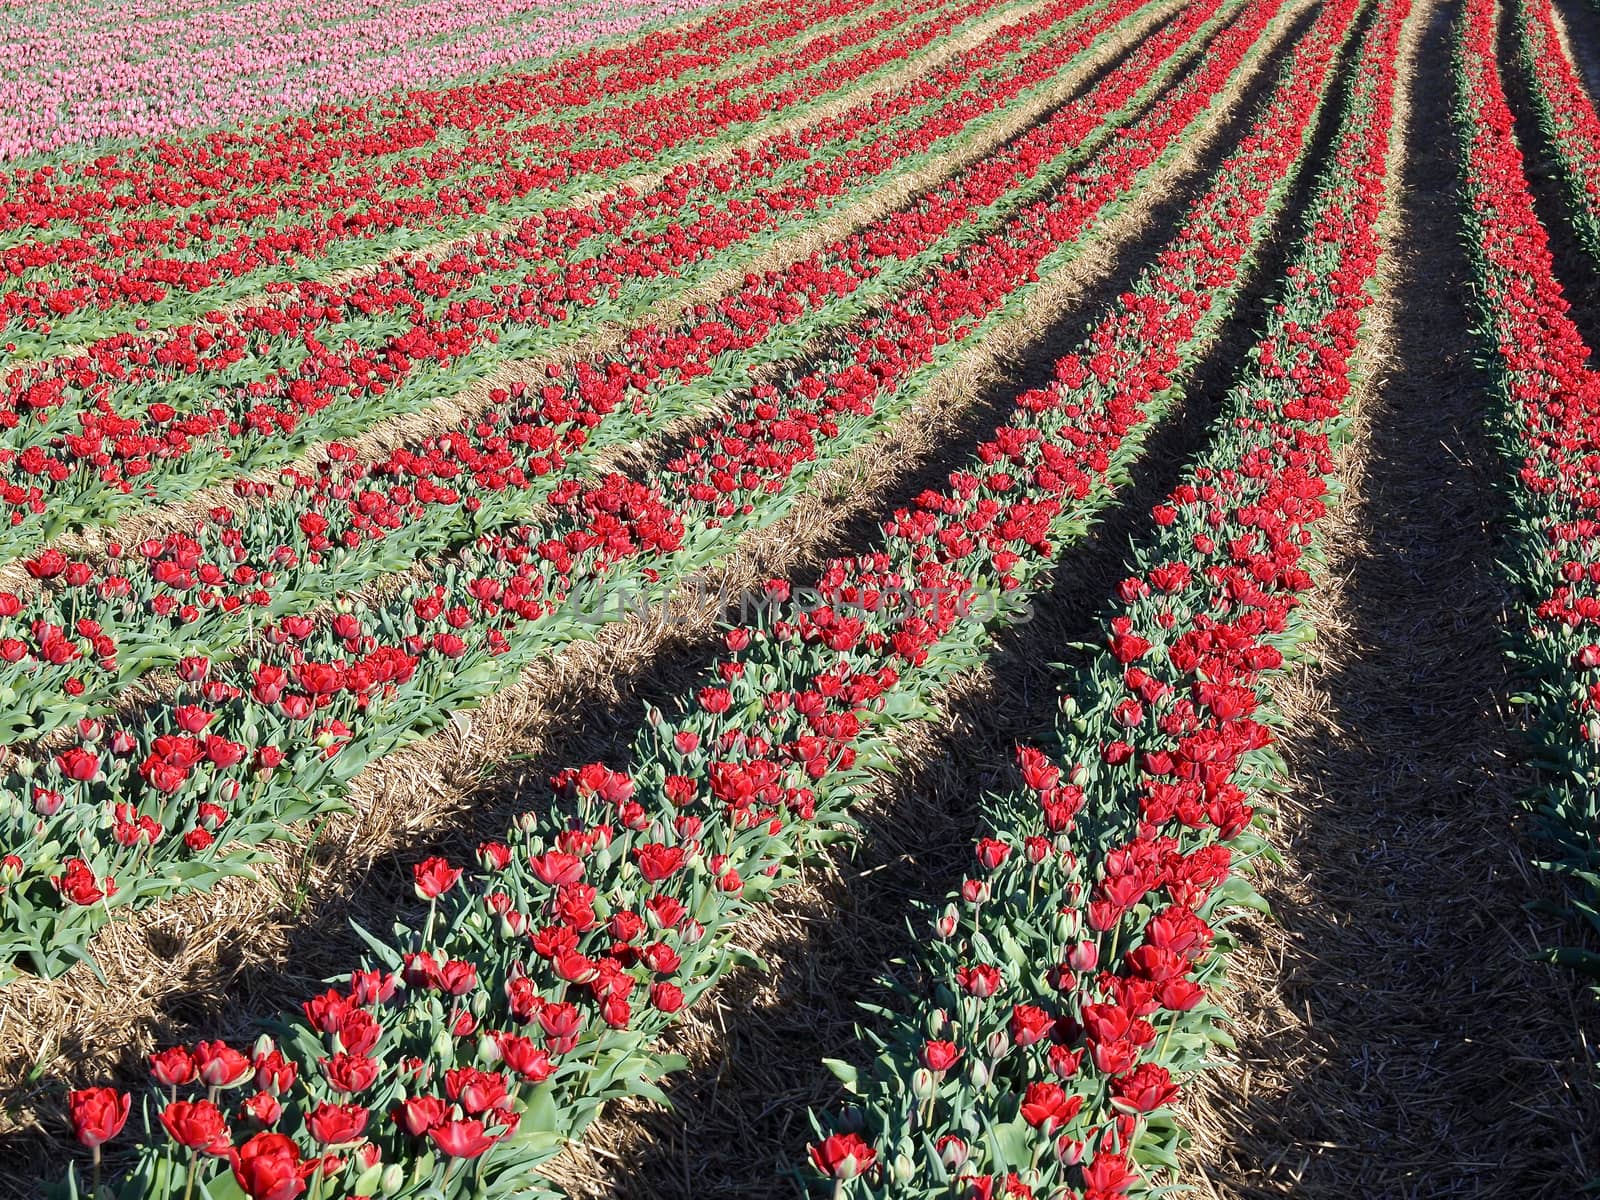 Agriculture - Colorful blooming tulip field by Stimmungsbilder